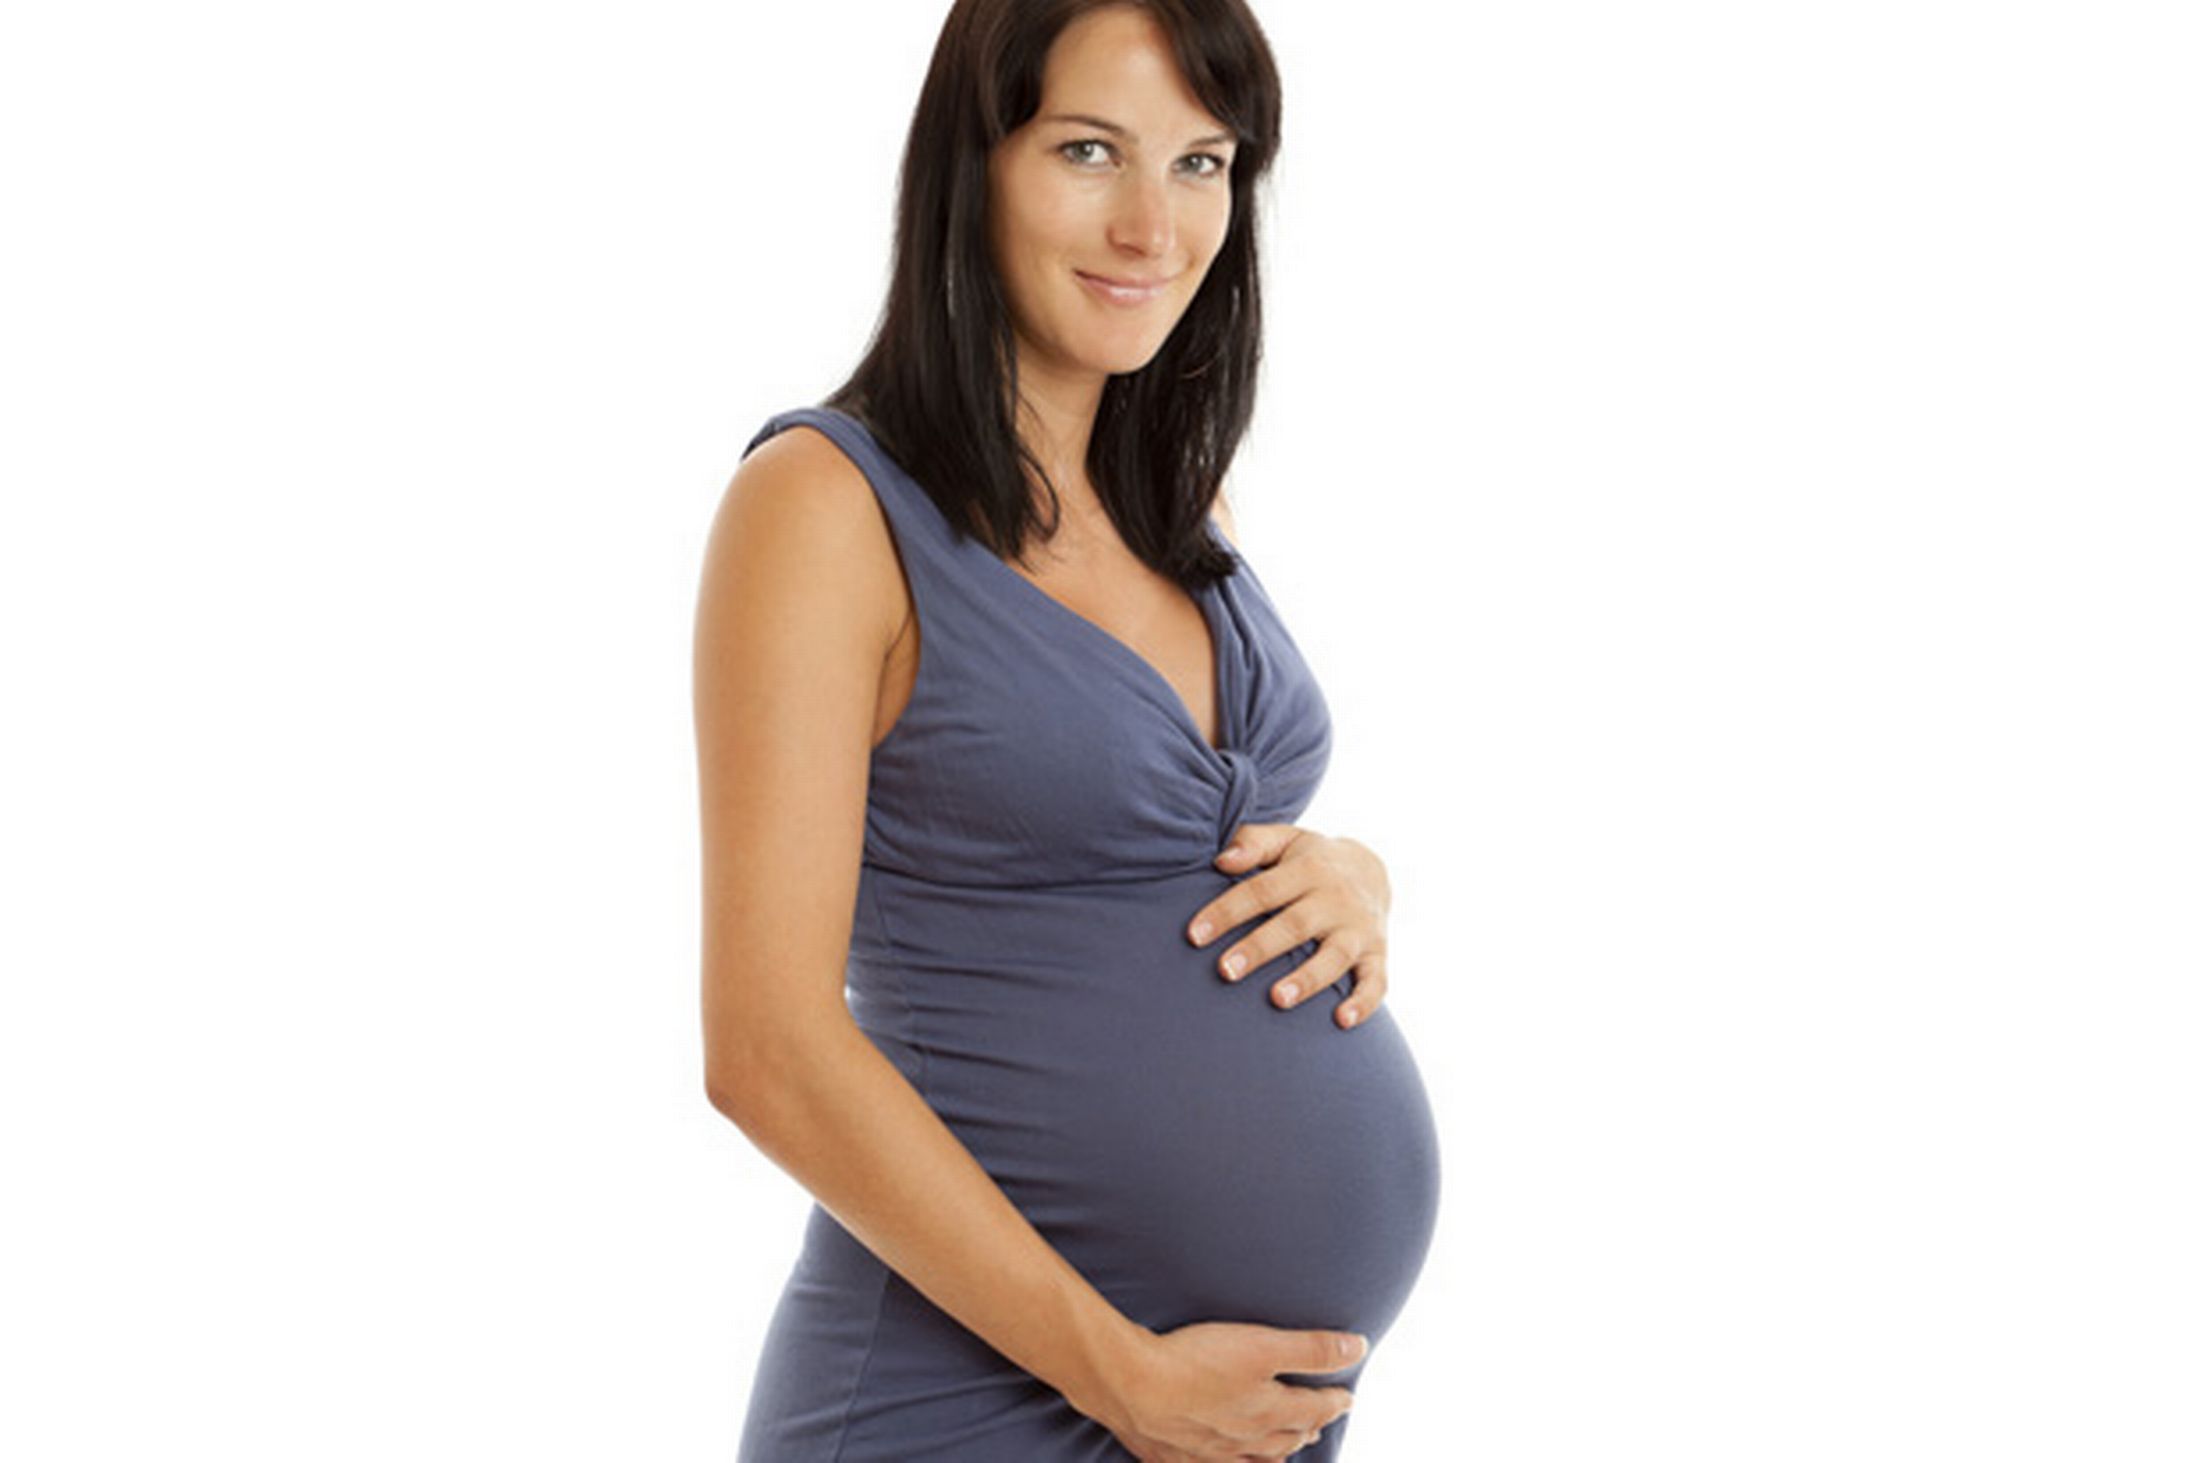 Treating pregnant woman for ovarian cyst | Diversityinhospitality ...